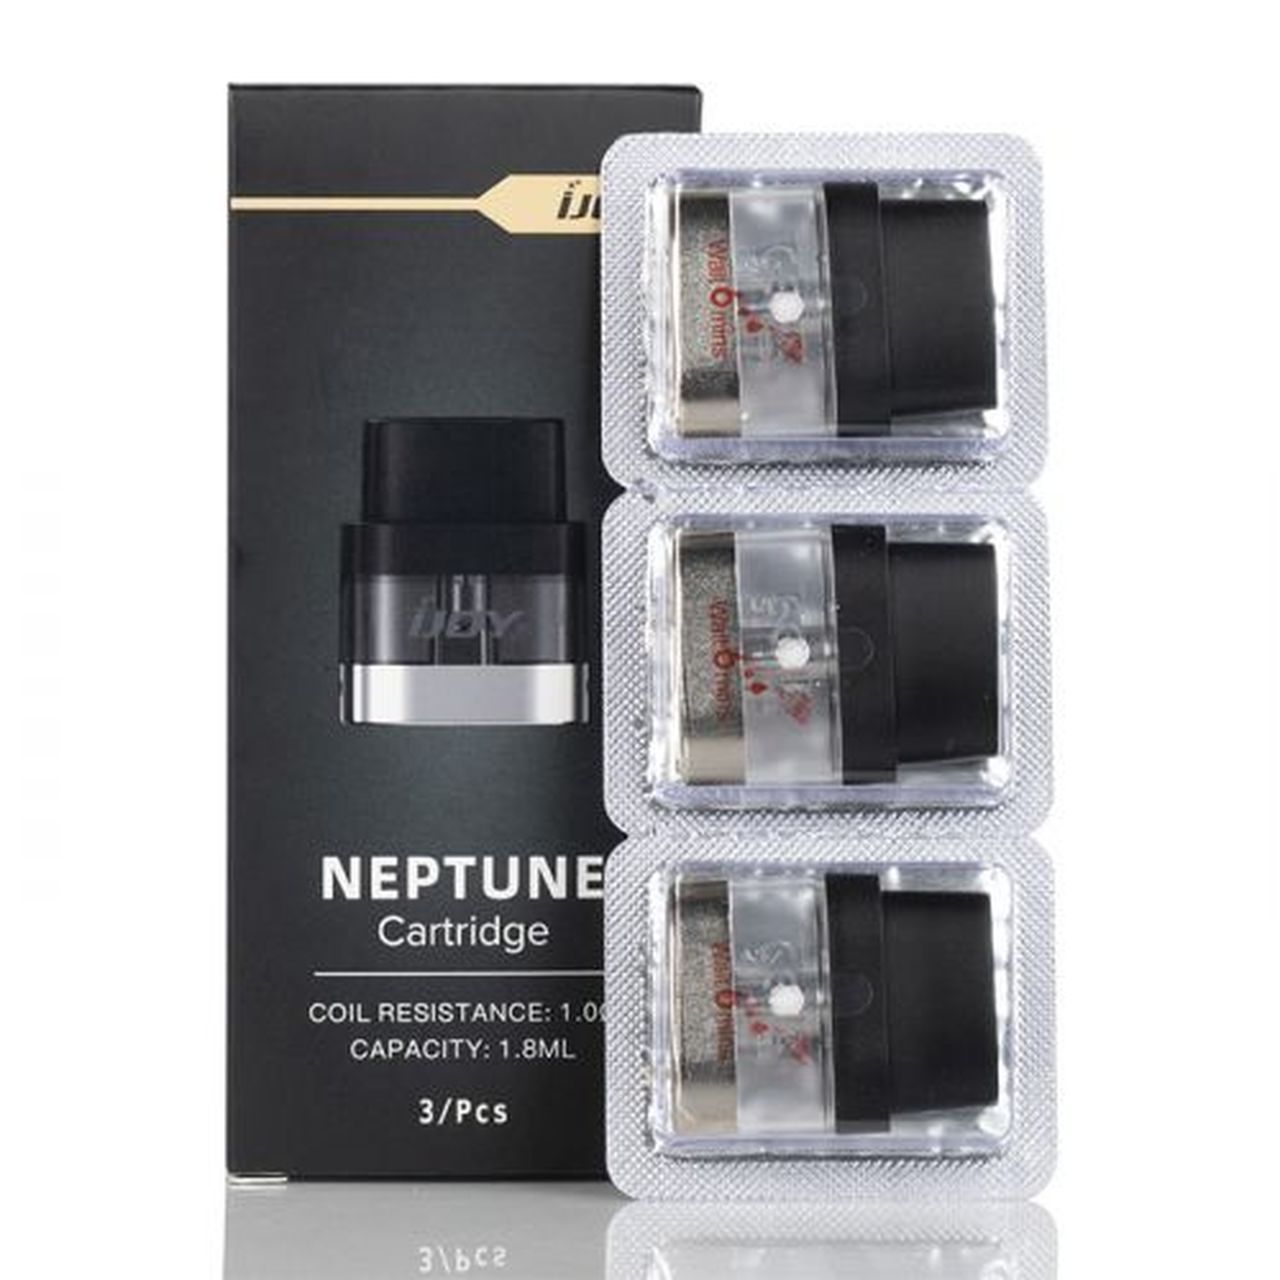 IJOY NEPTUNE REPLACEMEnt PODS - 3 PACK, Coils, IJOY - Ace Vape Melbourne